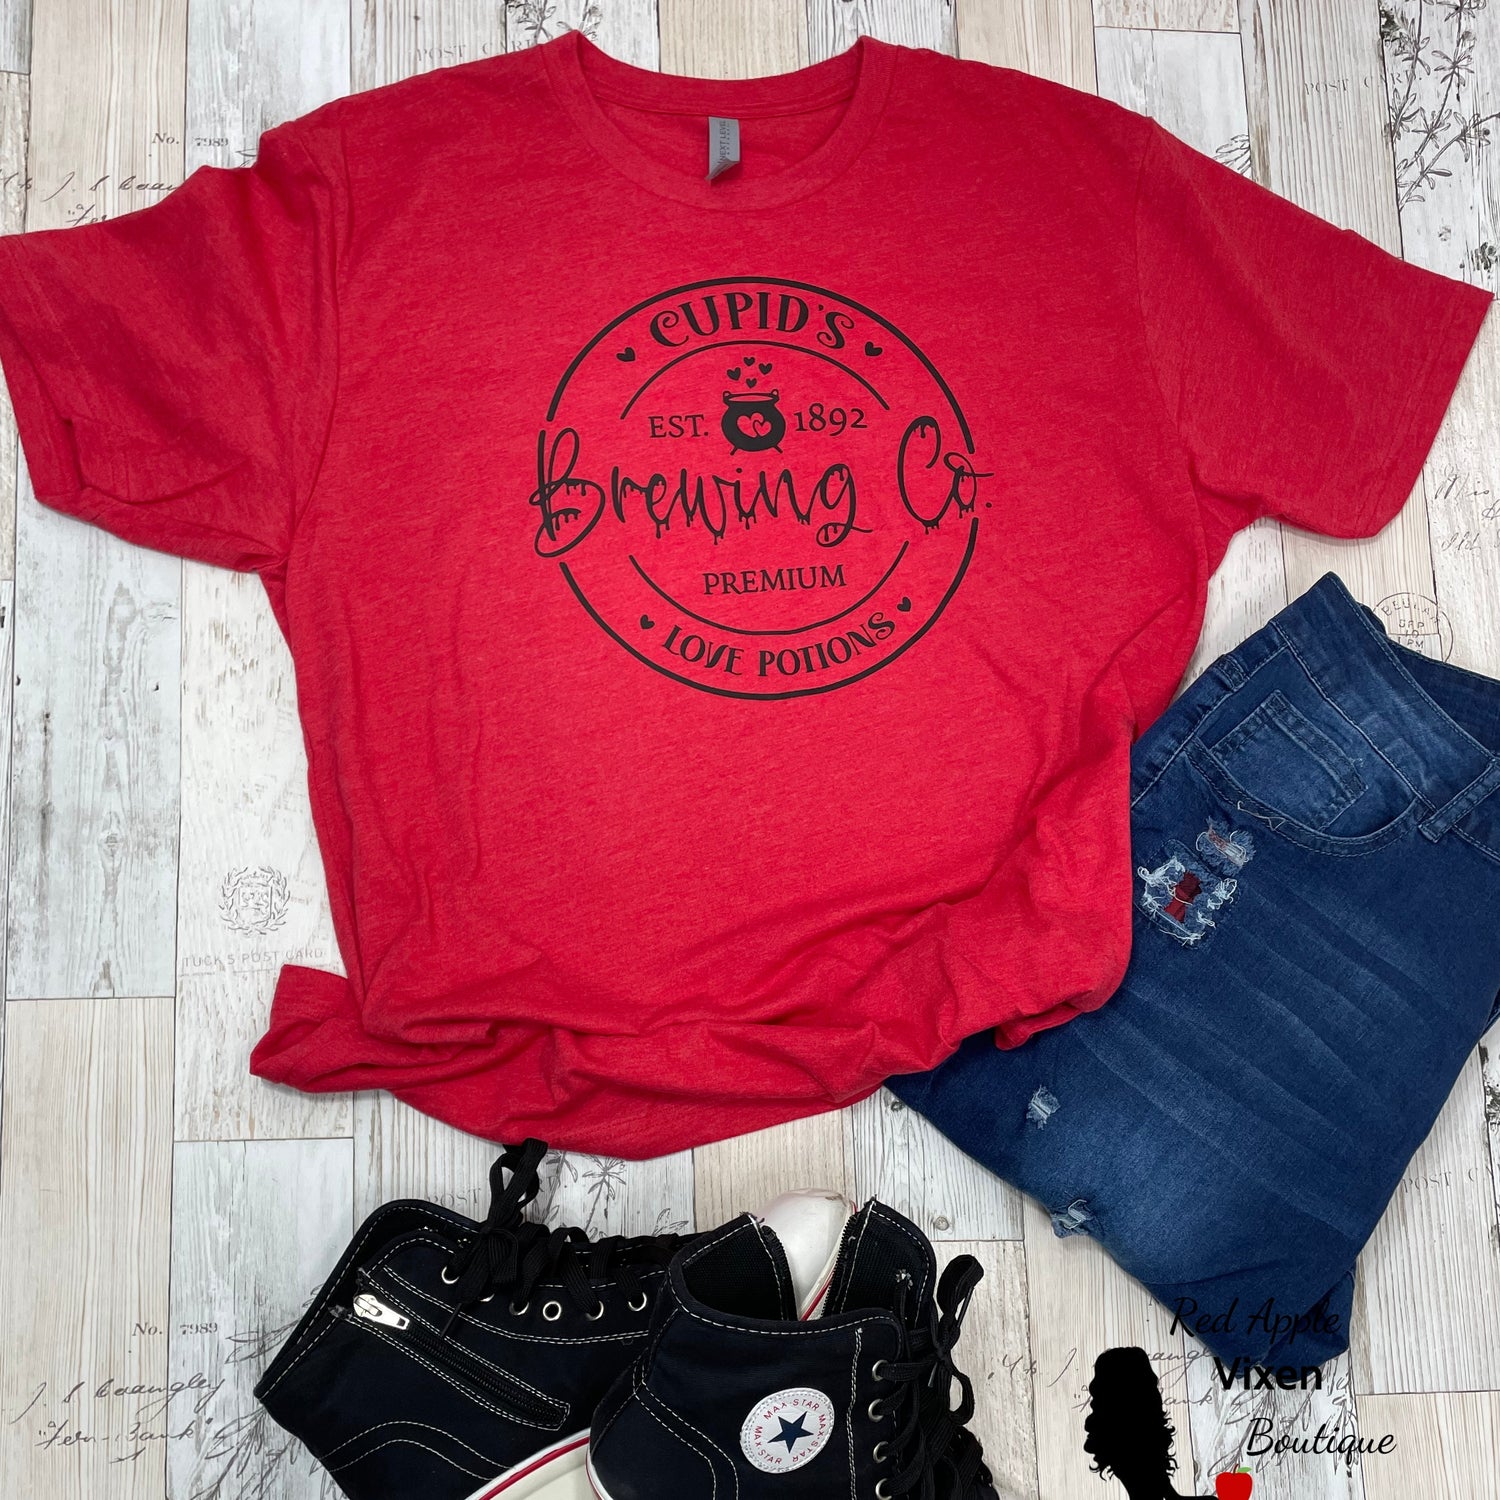 Cupid's Brewing Company Graphic Tee - Sassy Chick Clothing